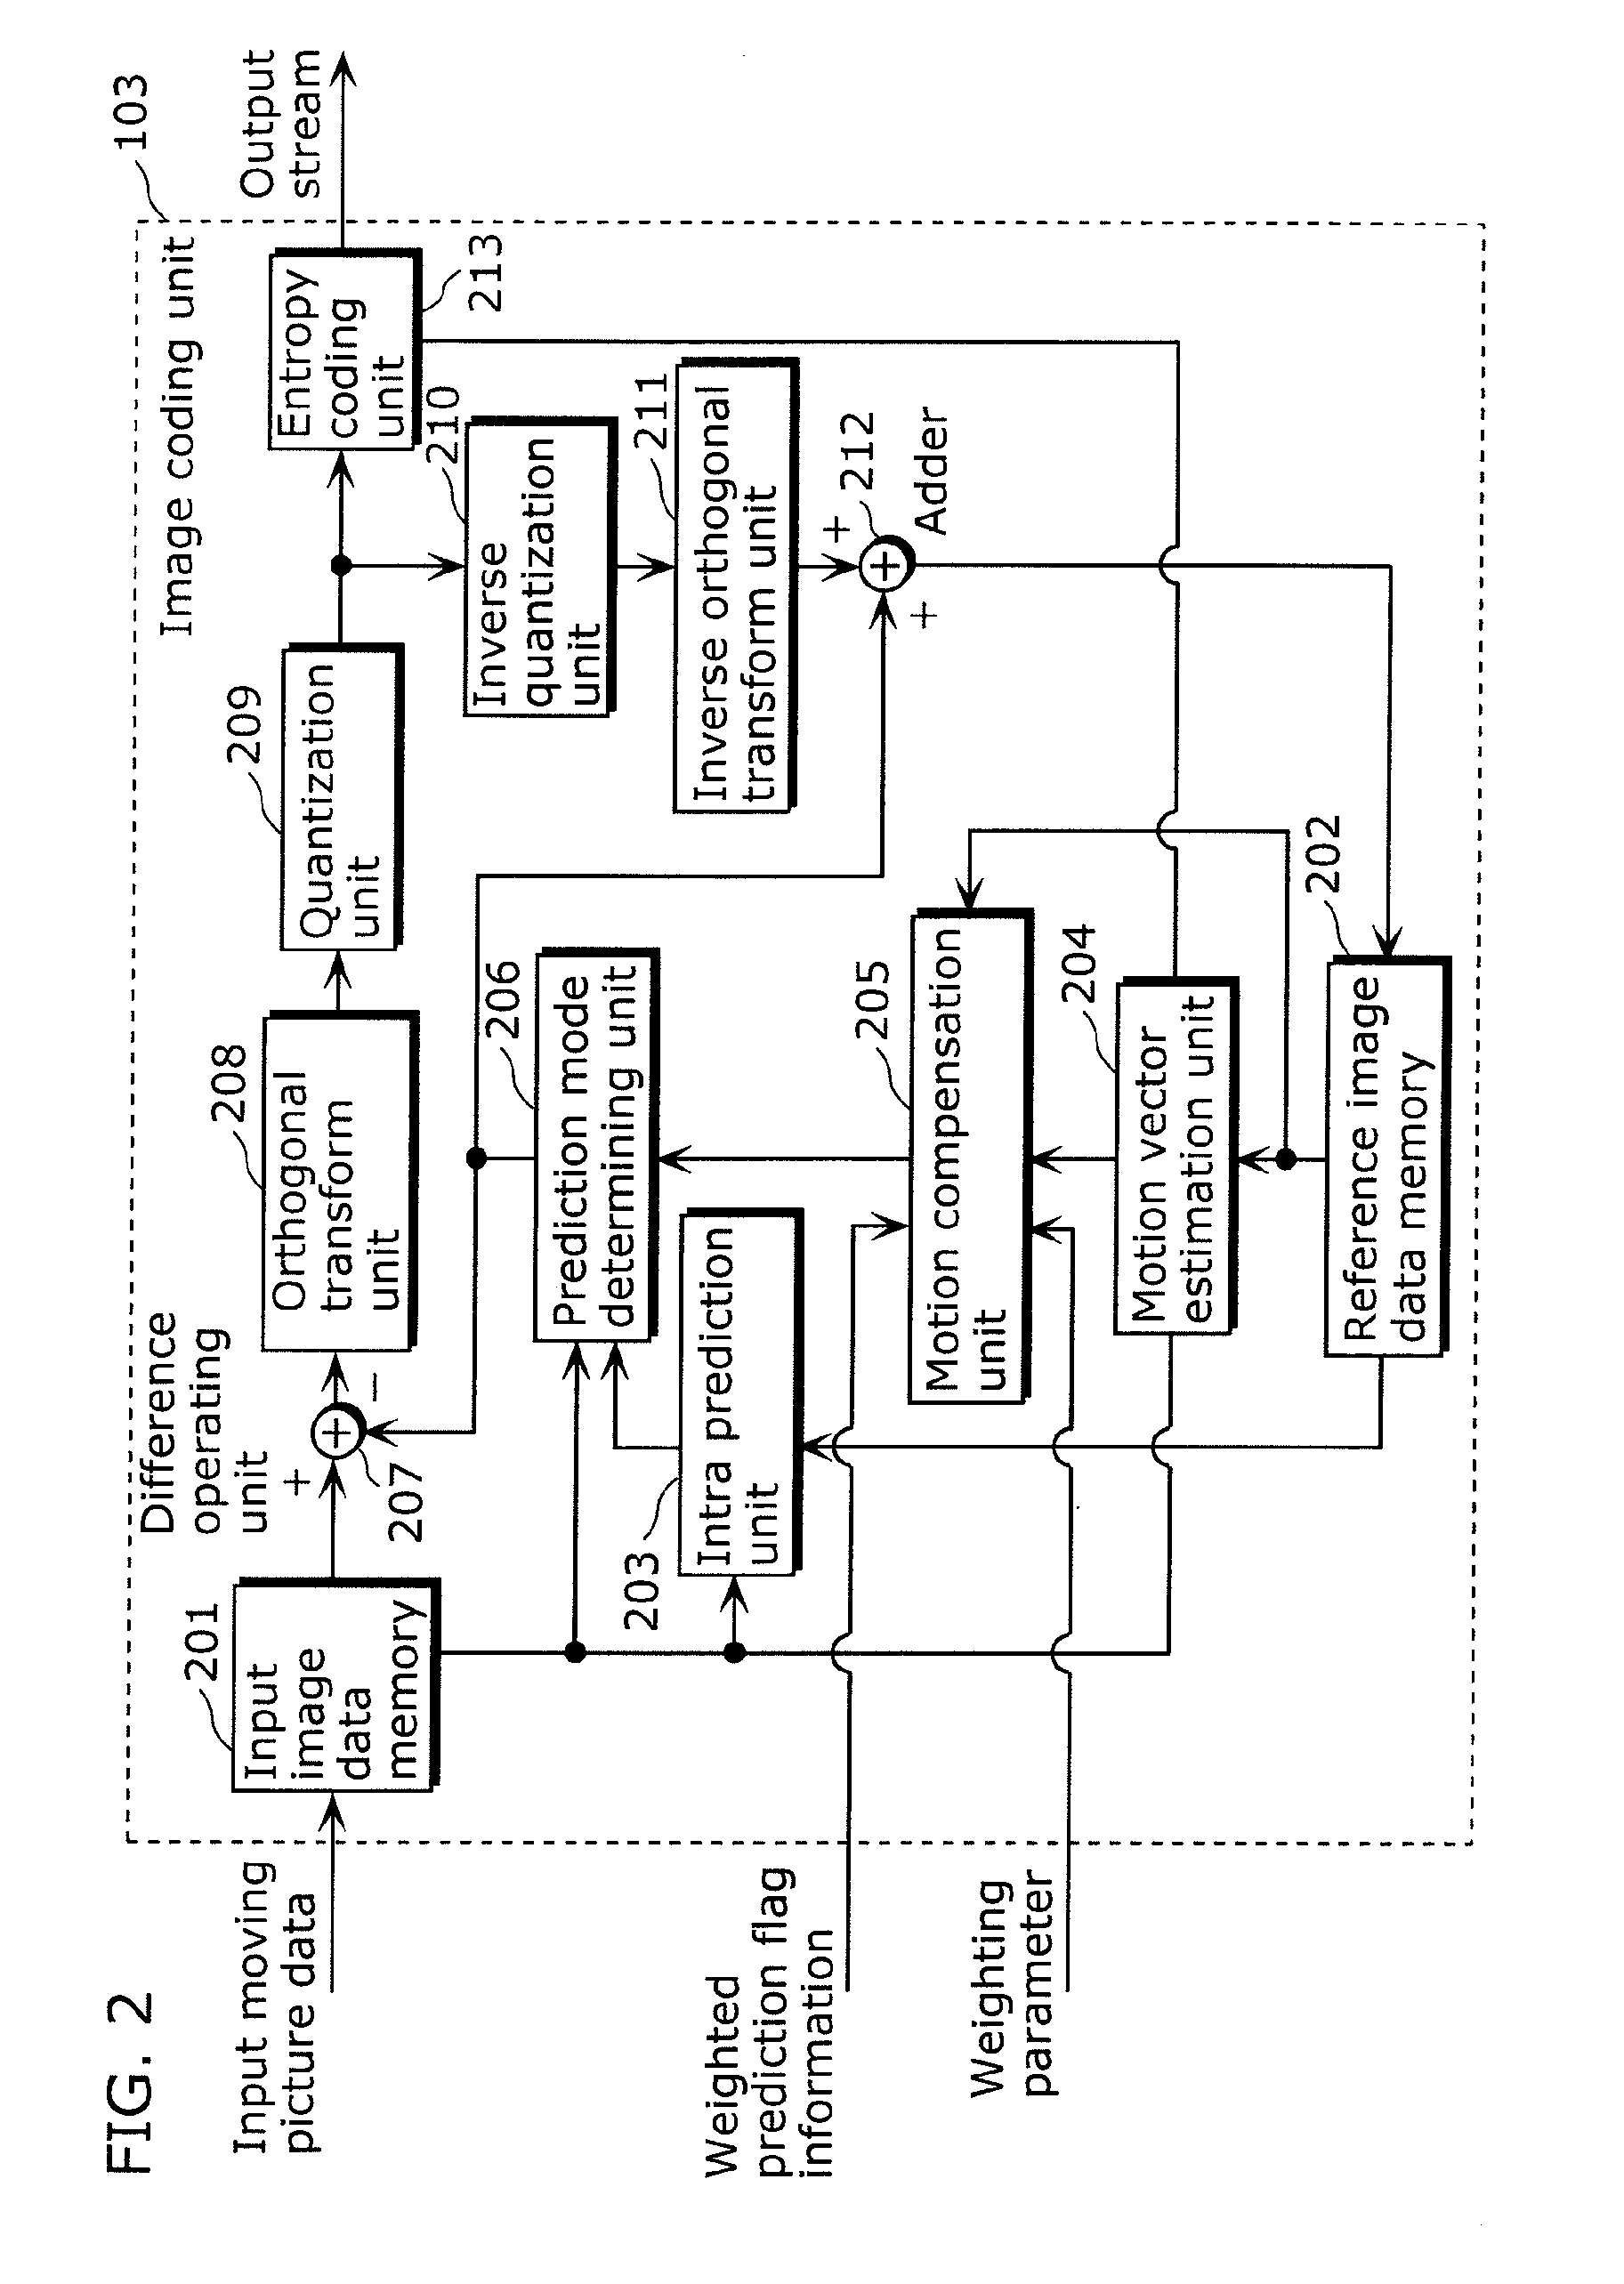 Image coding apparatus, image coding method, integrated circuit, and camera